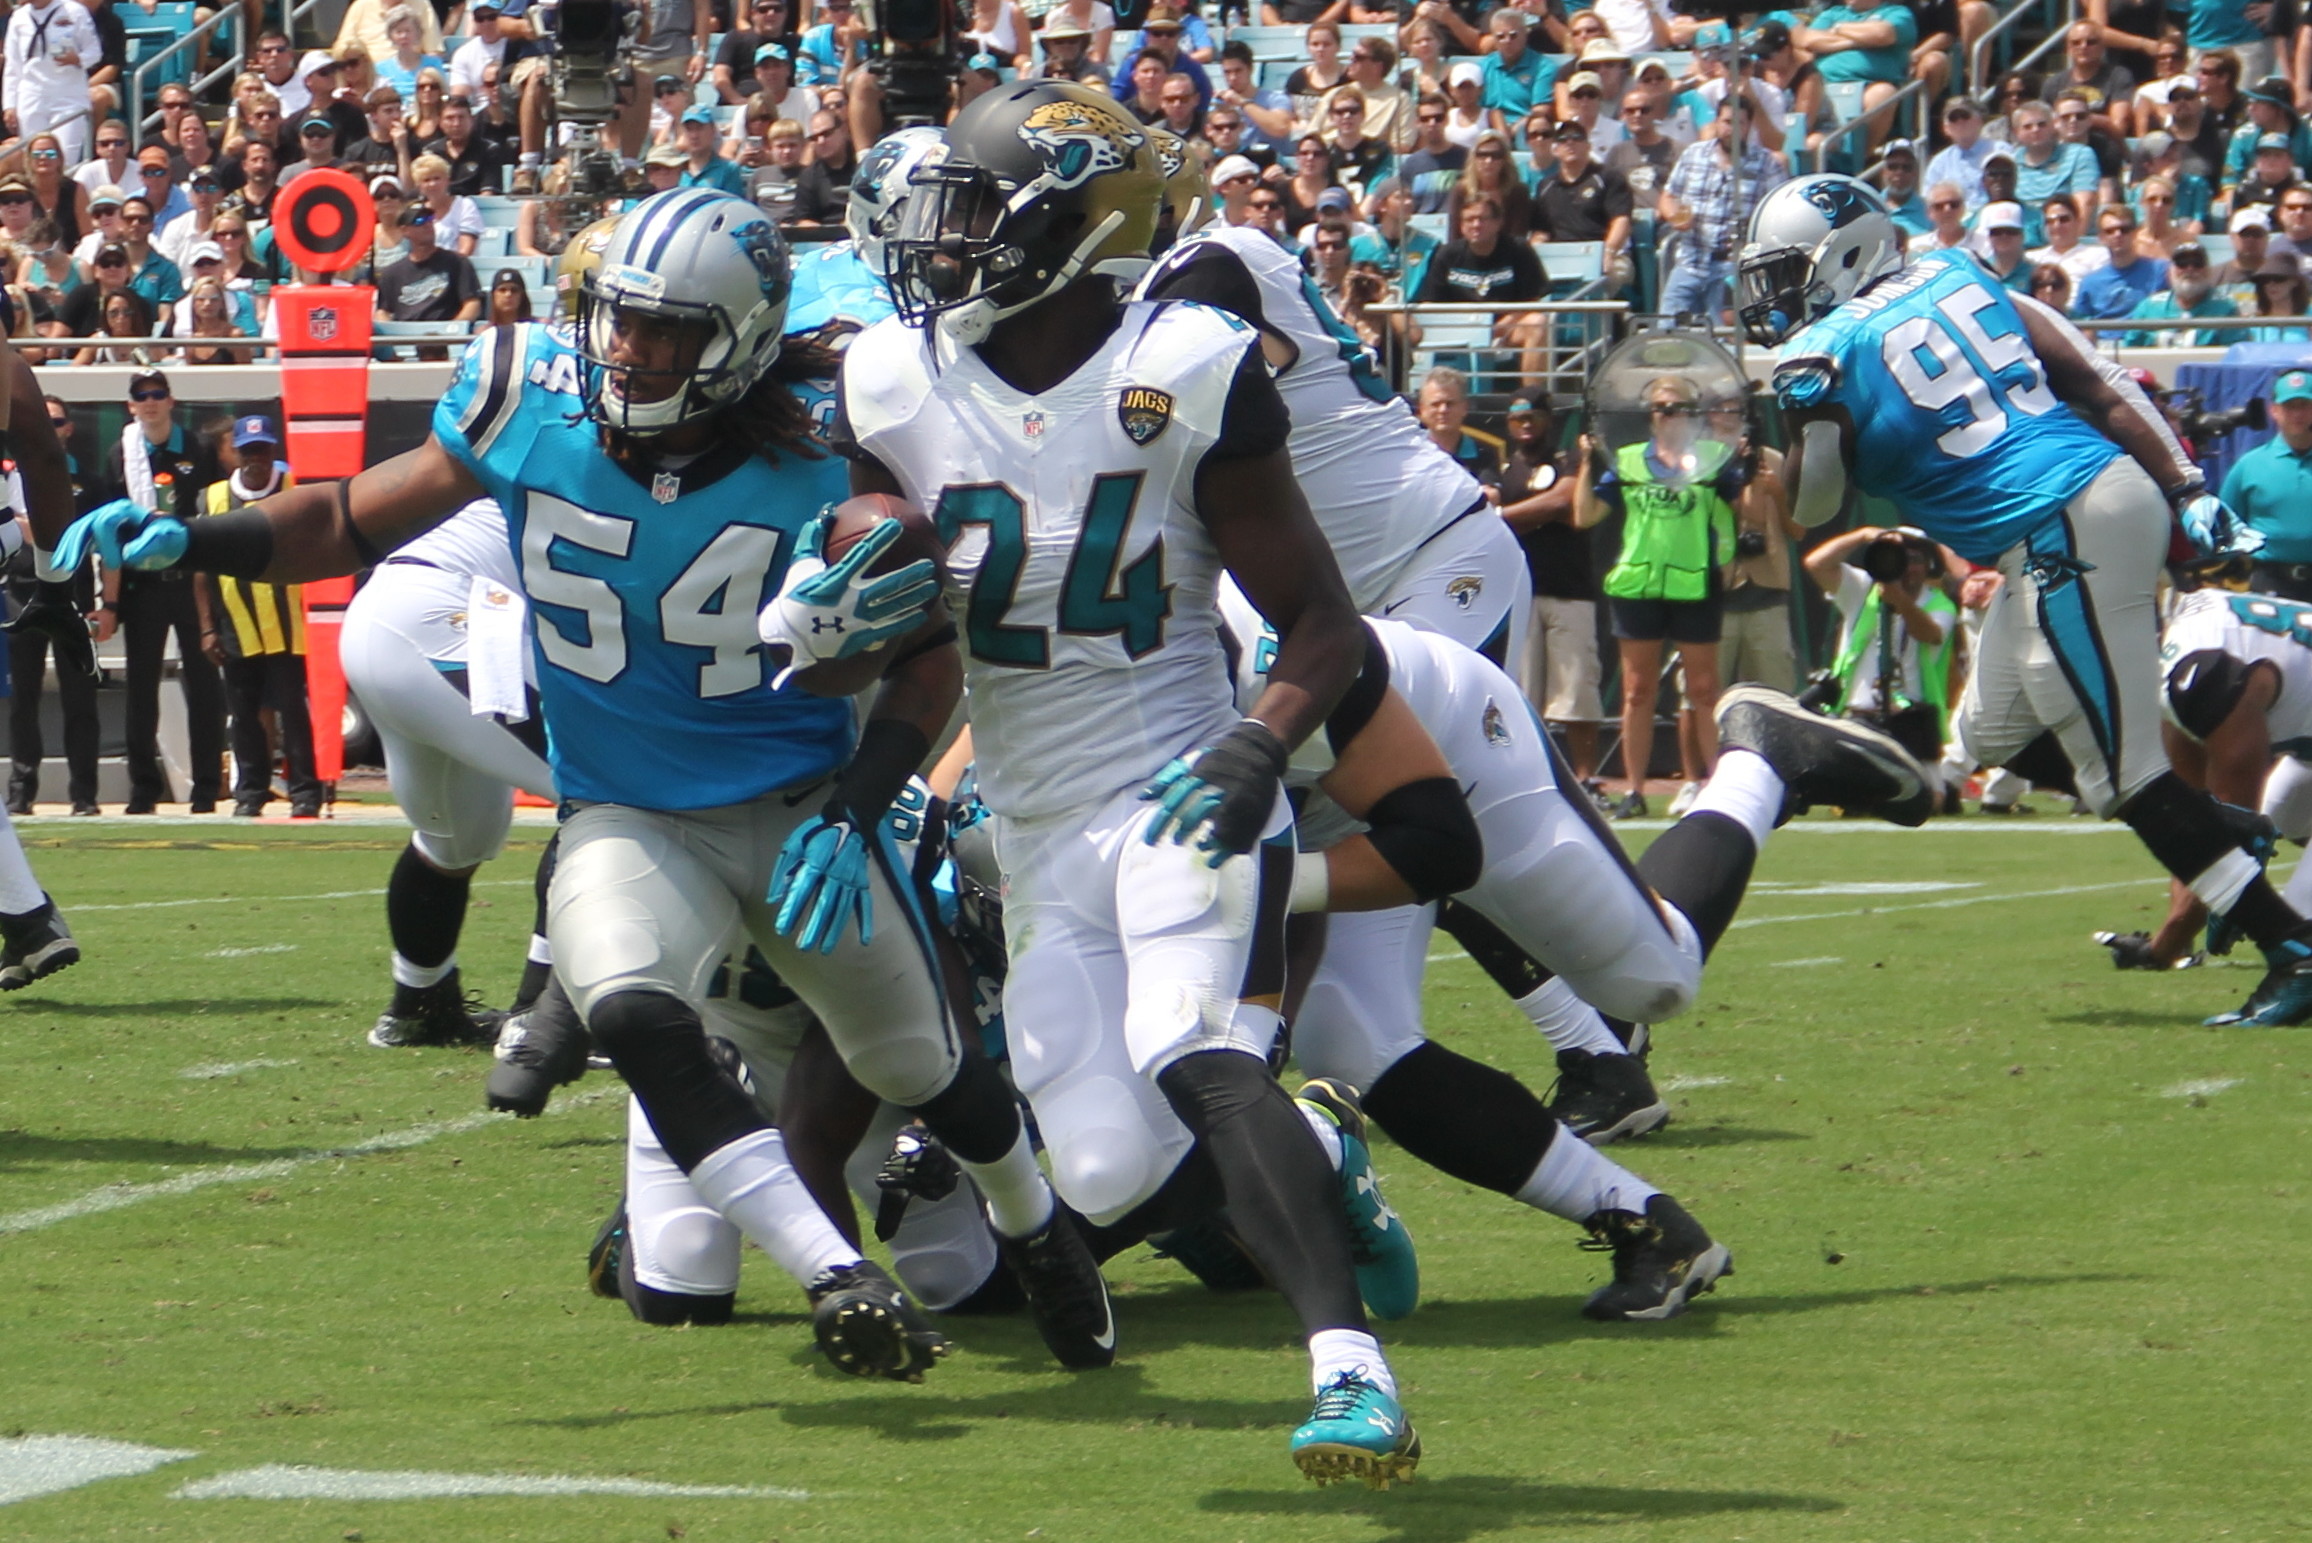 In his NFL debut Jaguars rookie running back T.J. Yeldon  rushed for 51 yards on 12 attempts for a 4.25 average.